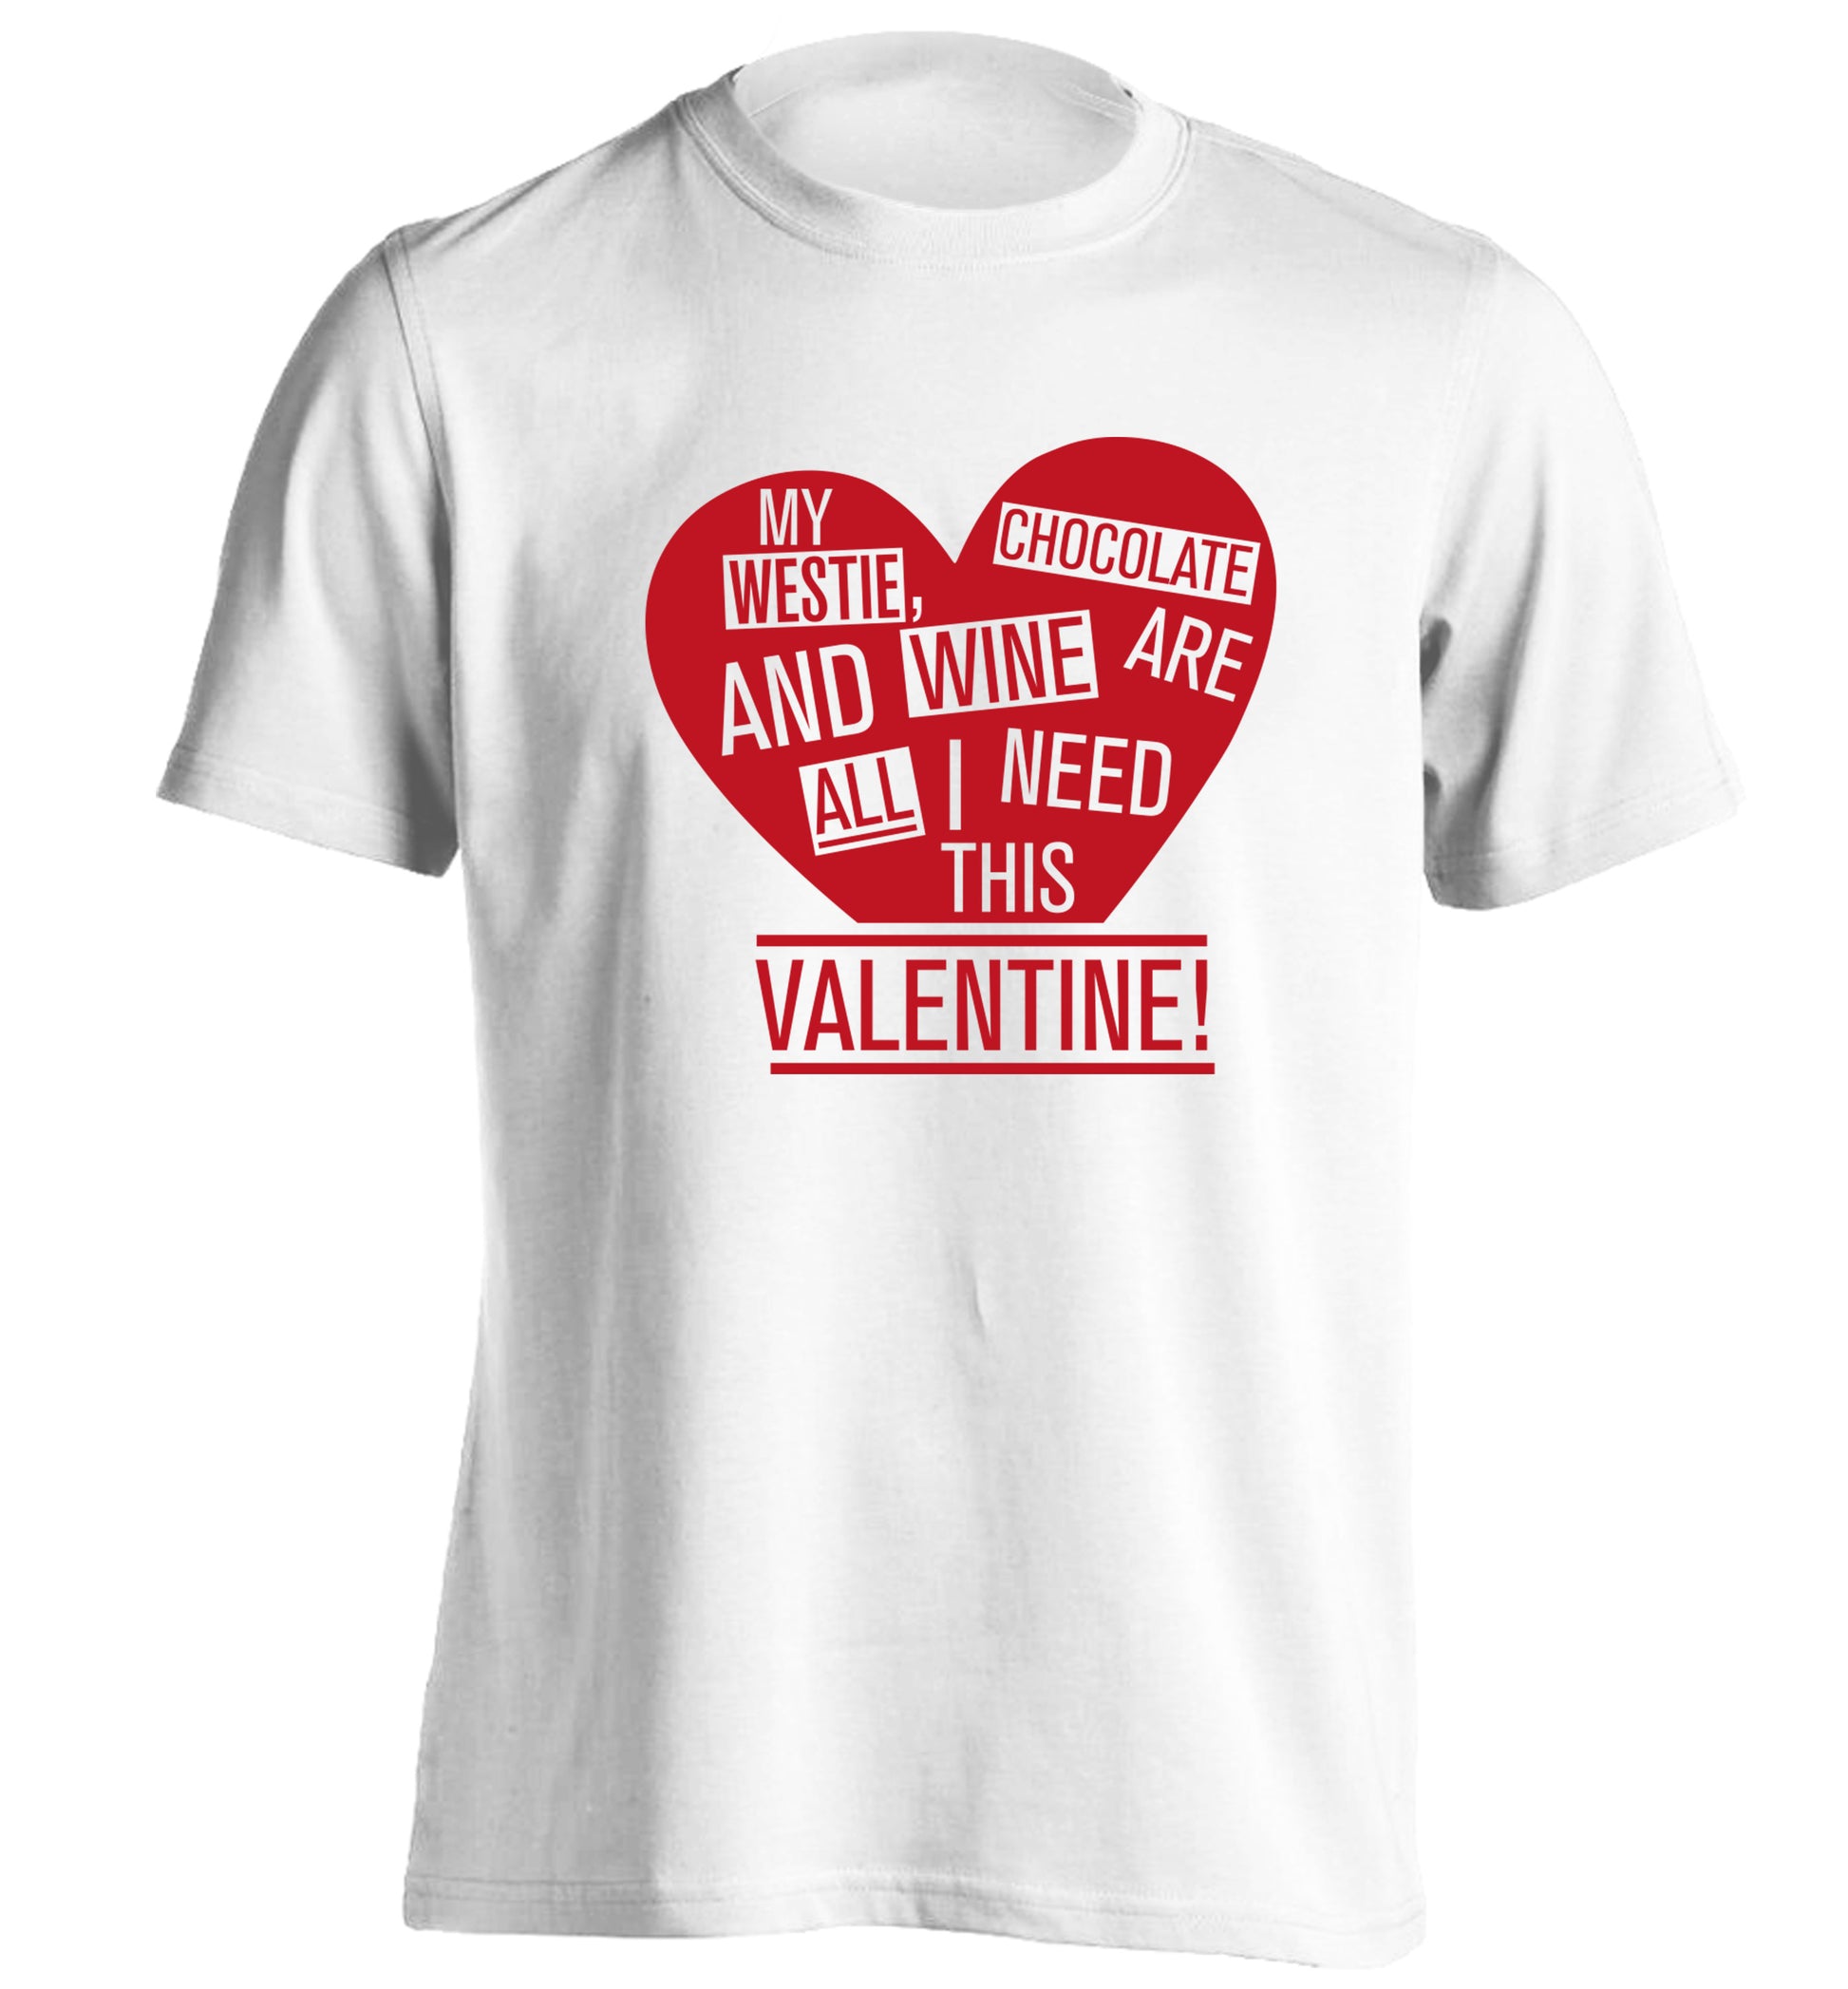 My westie, chocolate and wine are all I need this valentine! adults unisex white Tshirt 2XL